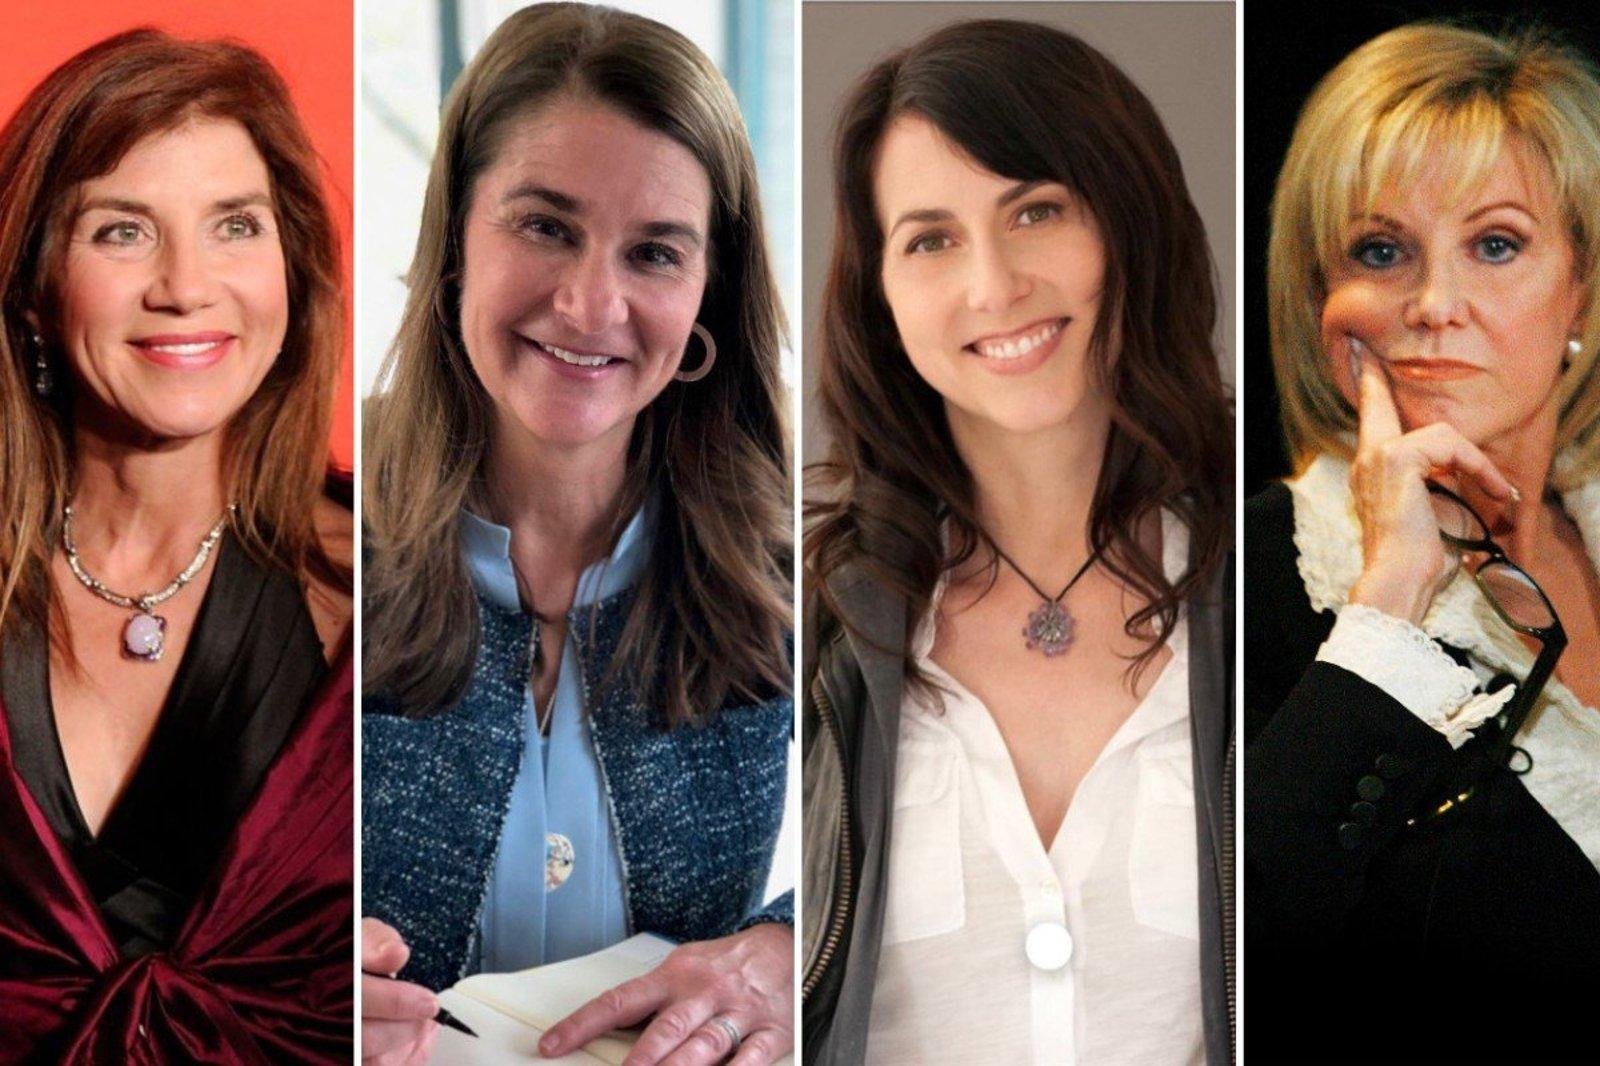 From Melinda Gates to Jeff Bezos’ former wife – The big-hearted billionaire ex-wives who are donating billions from their fortune. Mackenzie Scott has vowed to give away ‘until the safe is empty’.